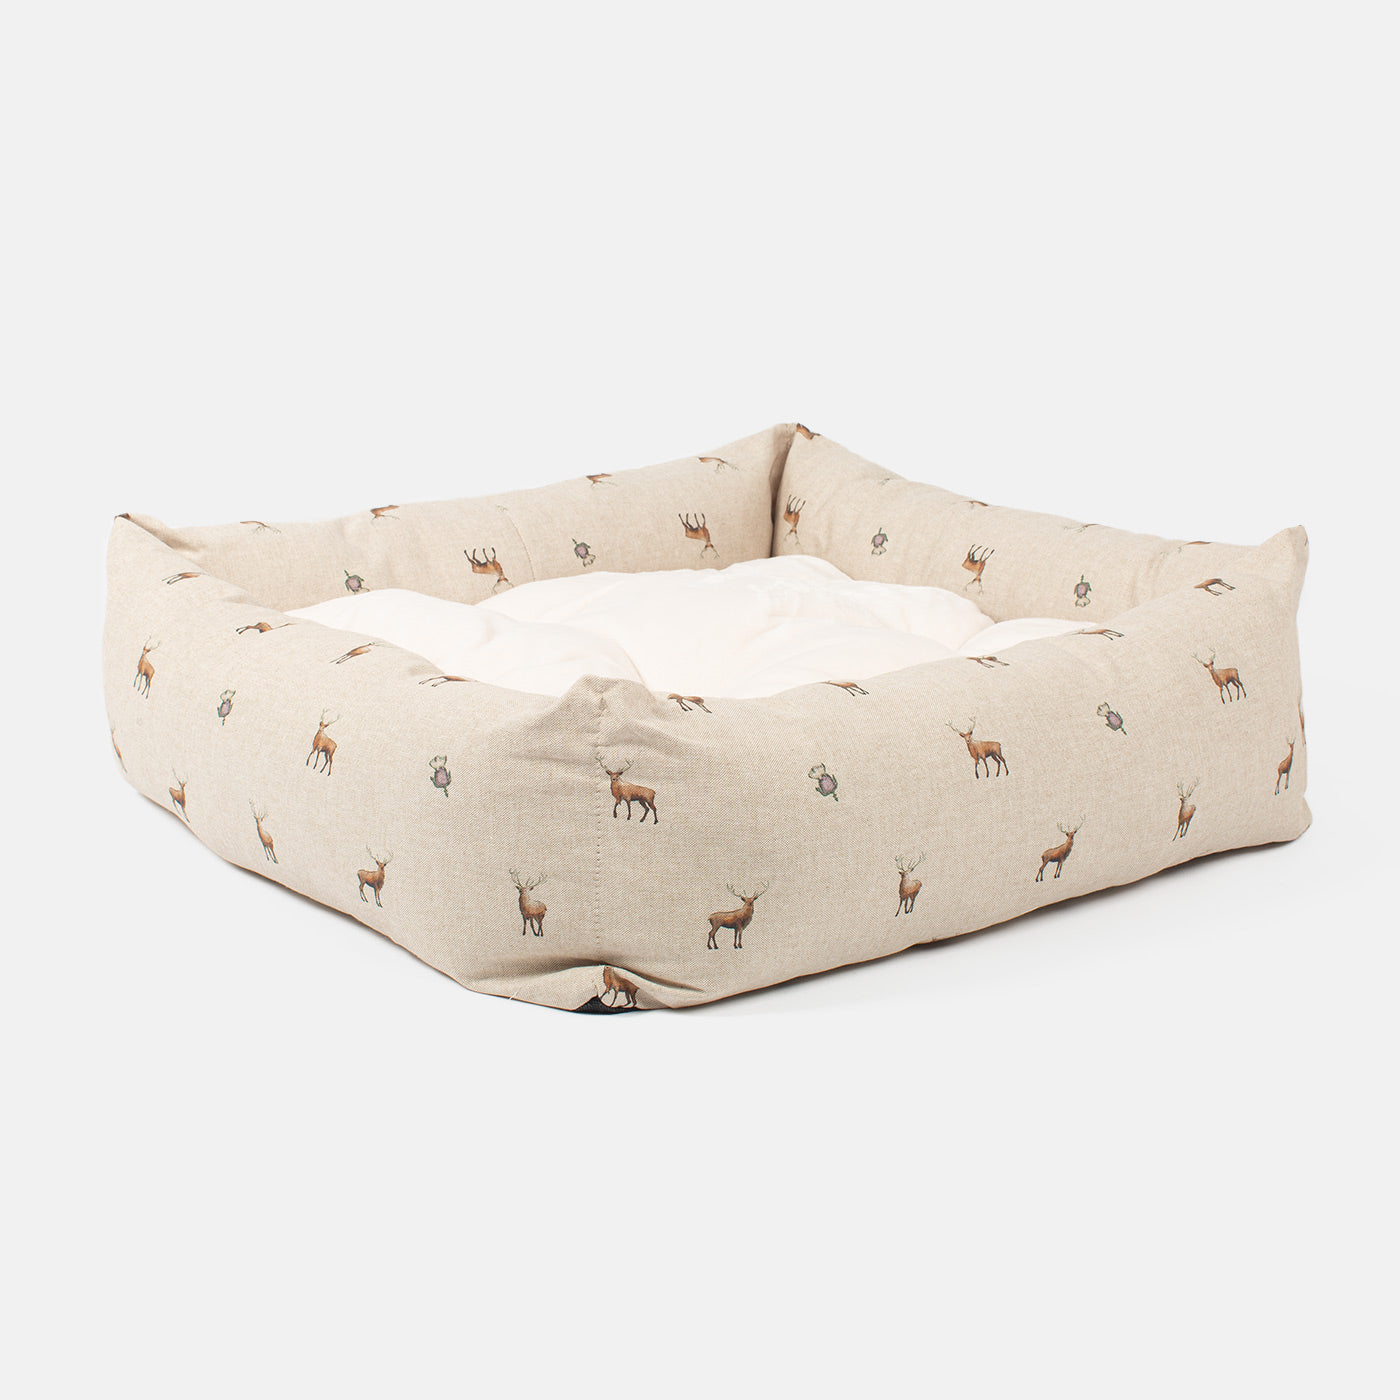 [color:woodland stag] Luxury Handmade Box Bed For Dogs in Woodlands, in Woodland Stag. Perfect For Your Pets Nap Time! Available To Personalize at Lords & Labradors US